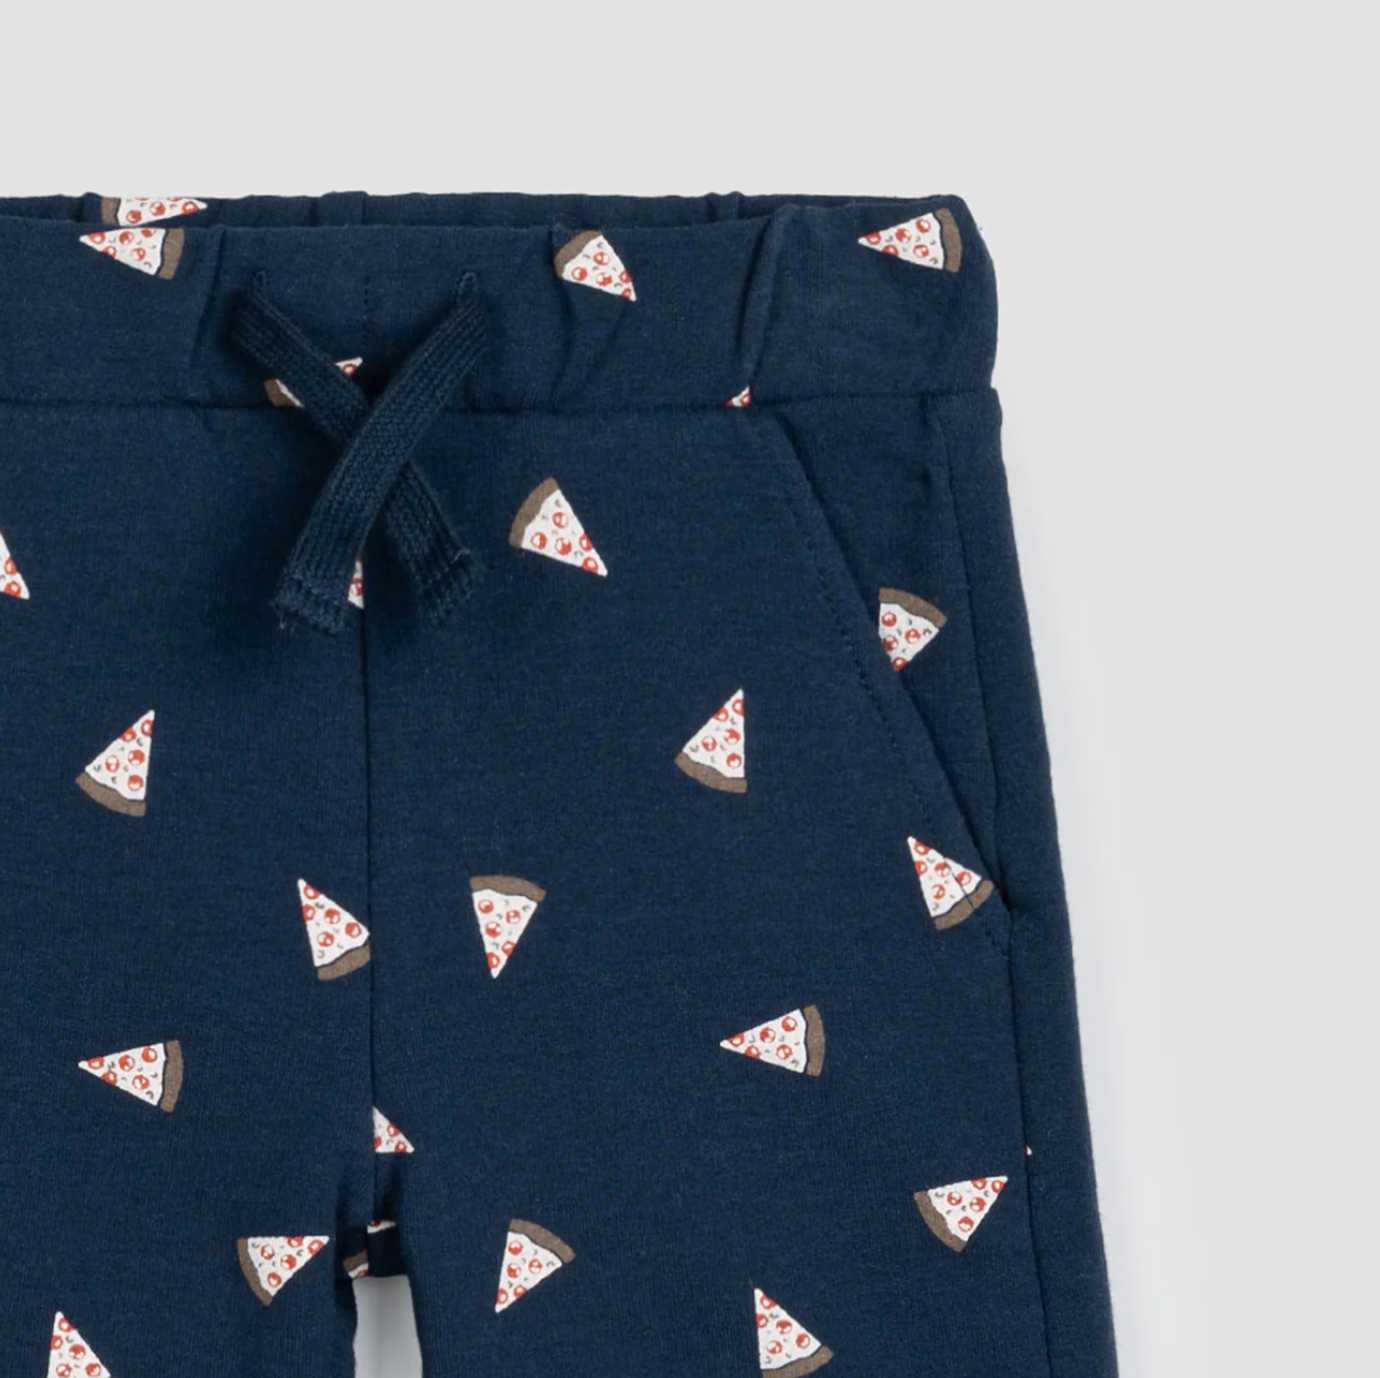 Pizza Print on Navy Terry Shorts